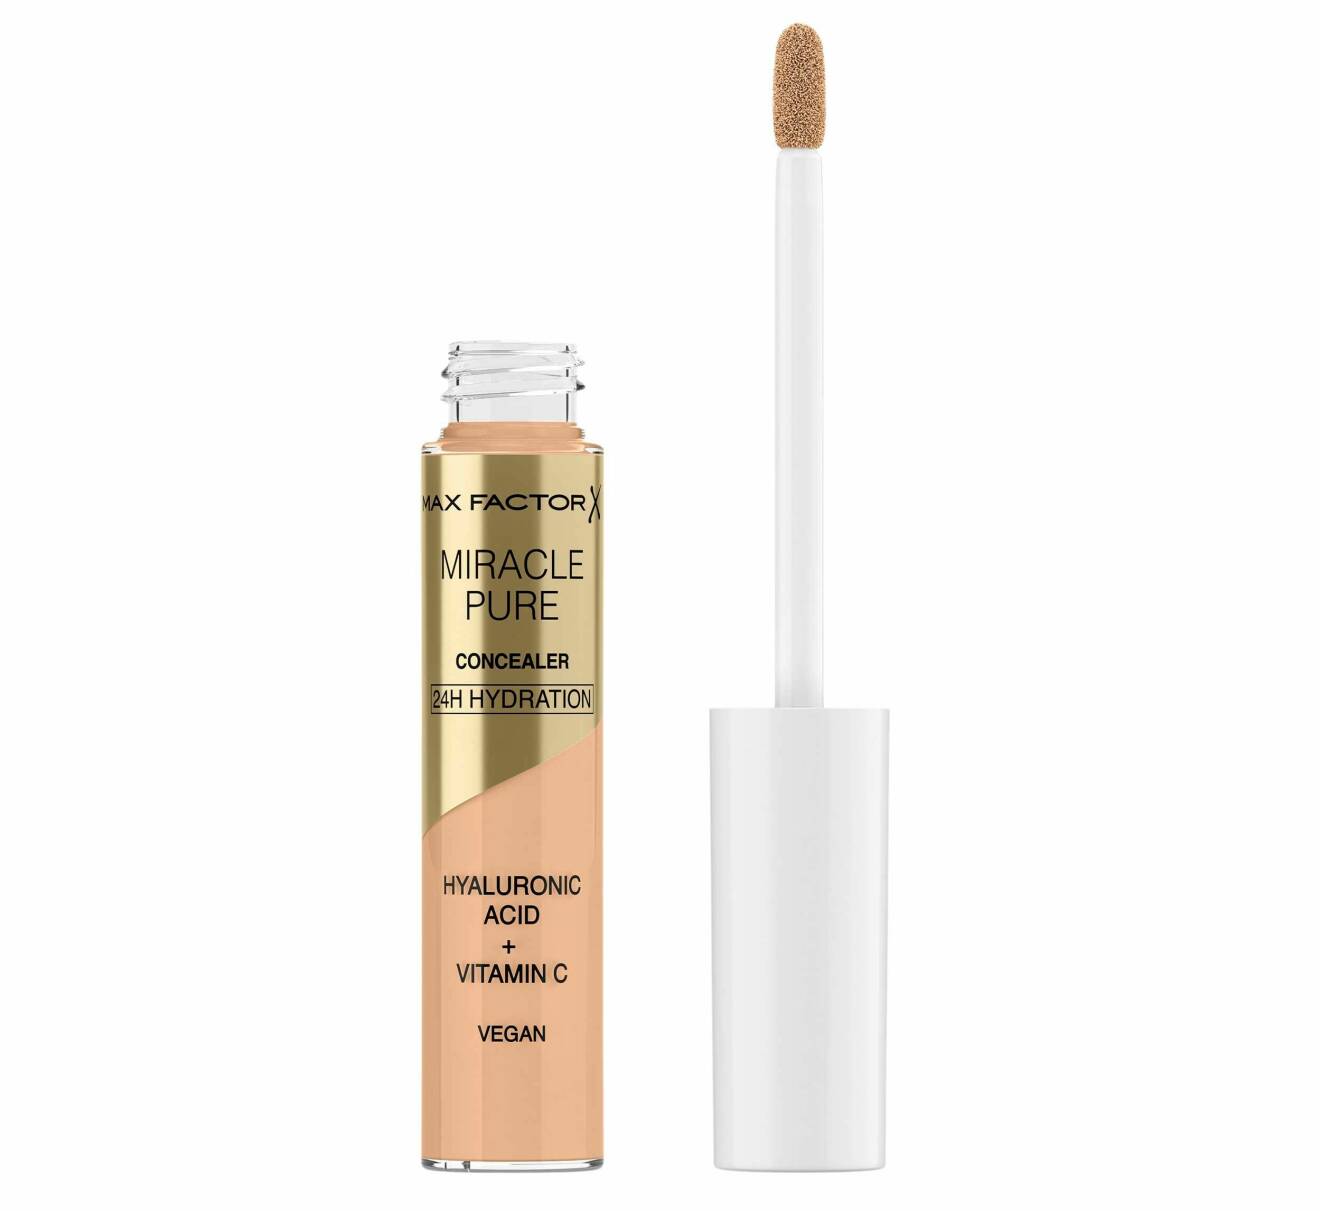 Miracle Pure Concealer från Max Factor.